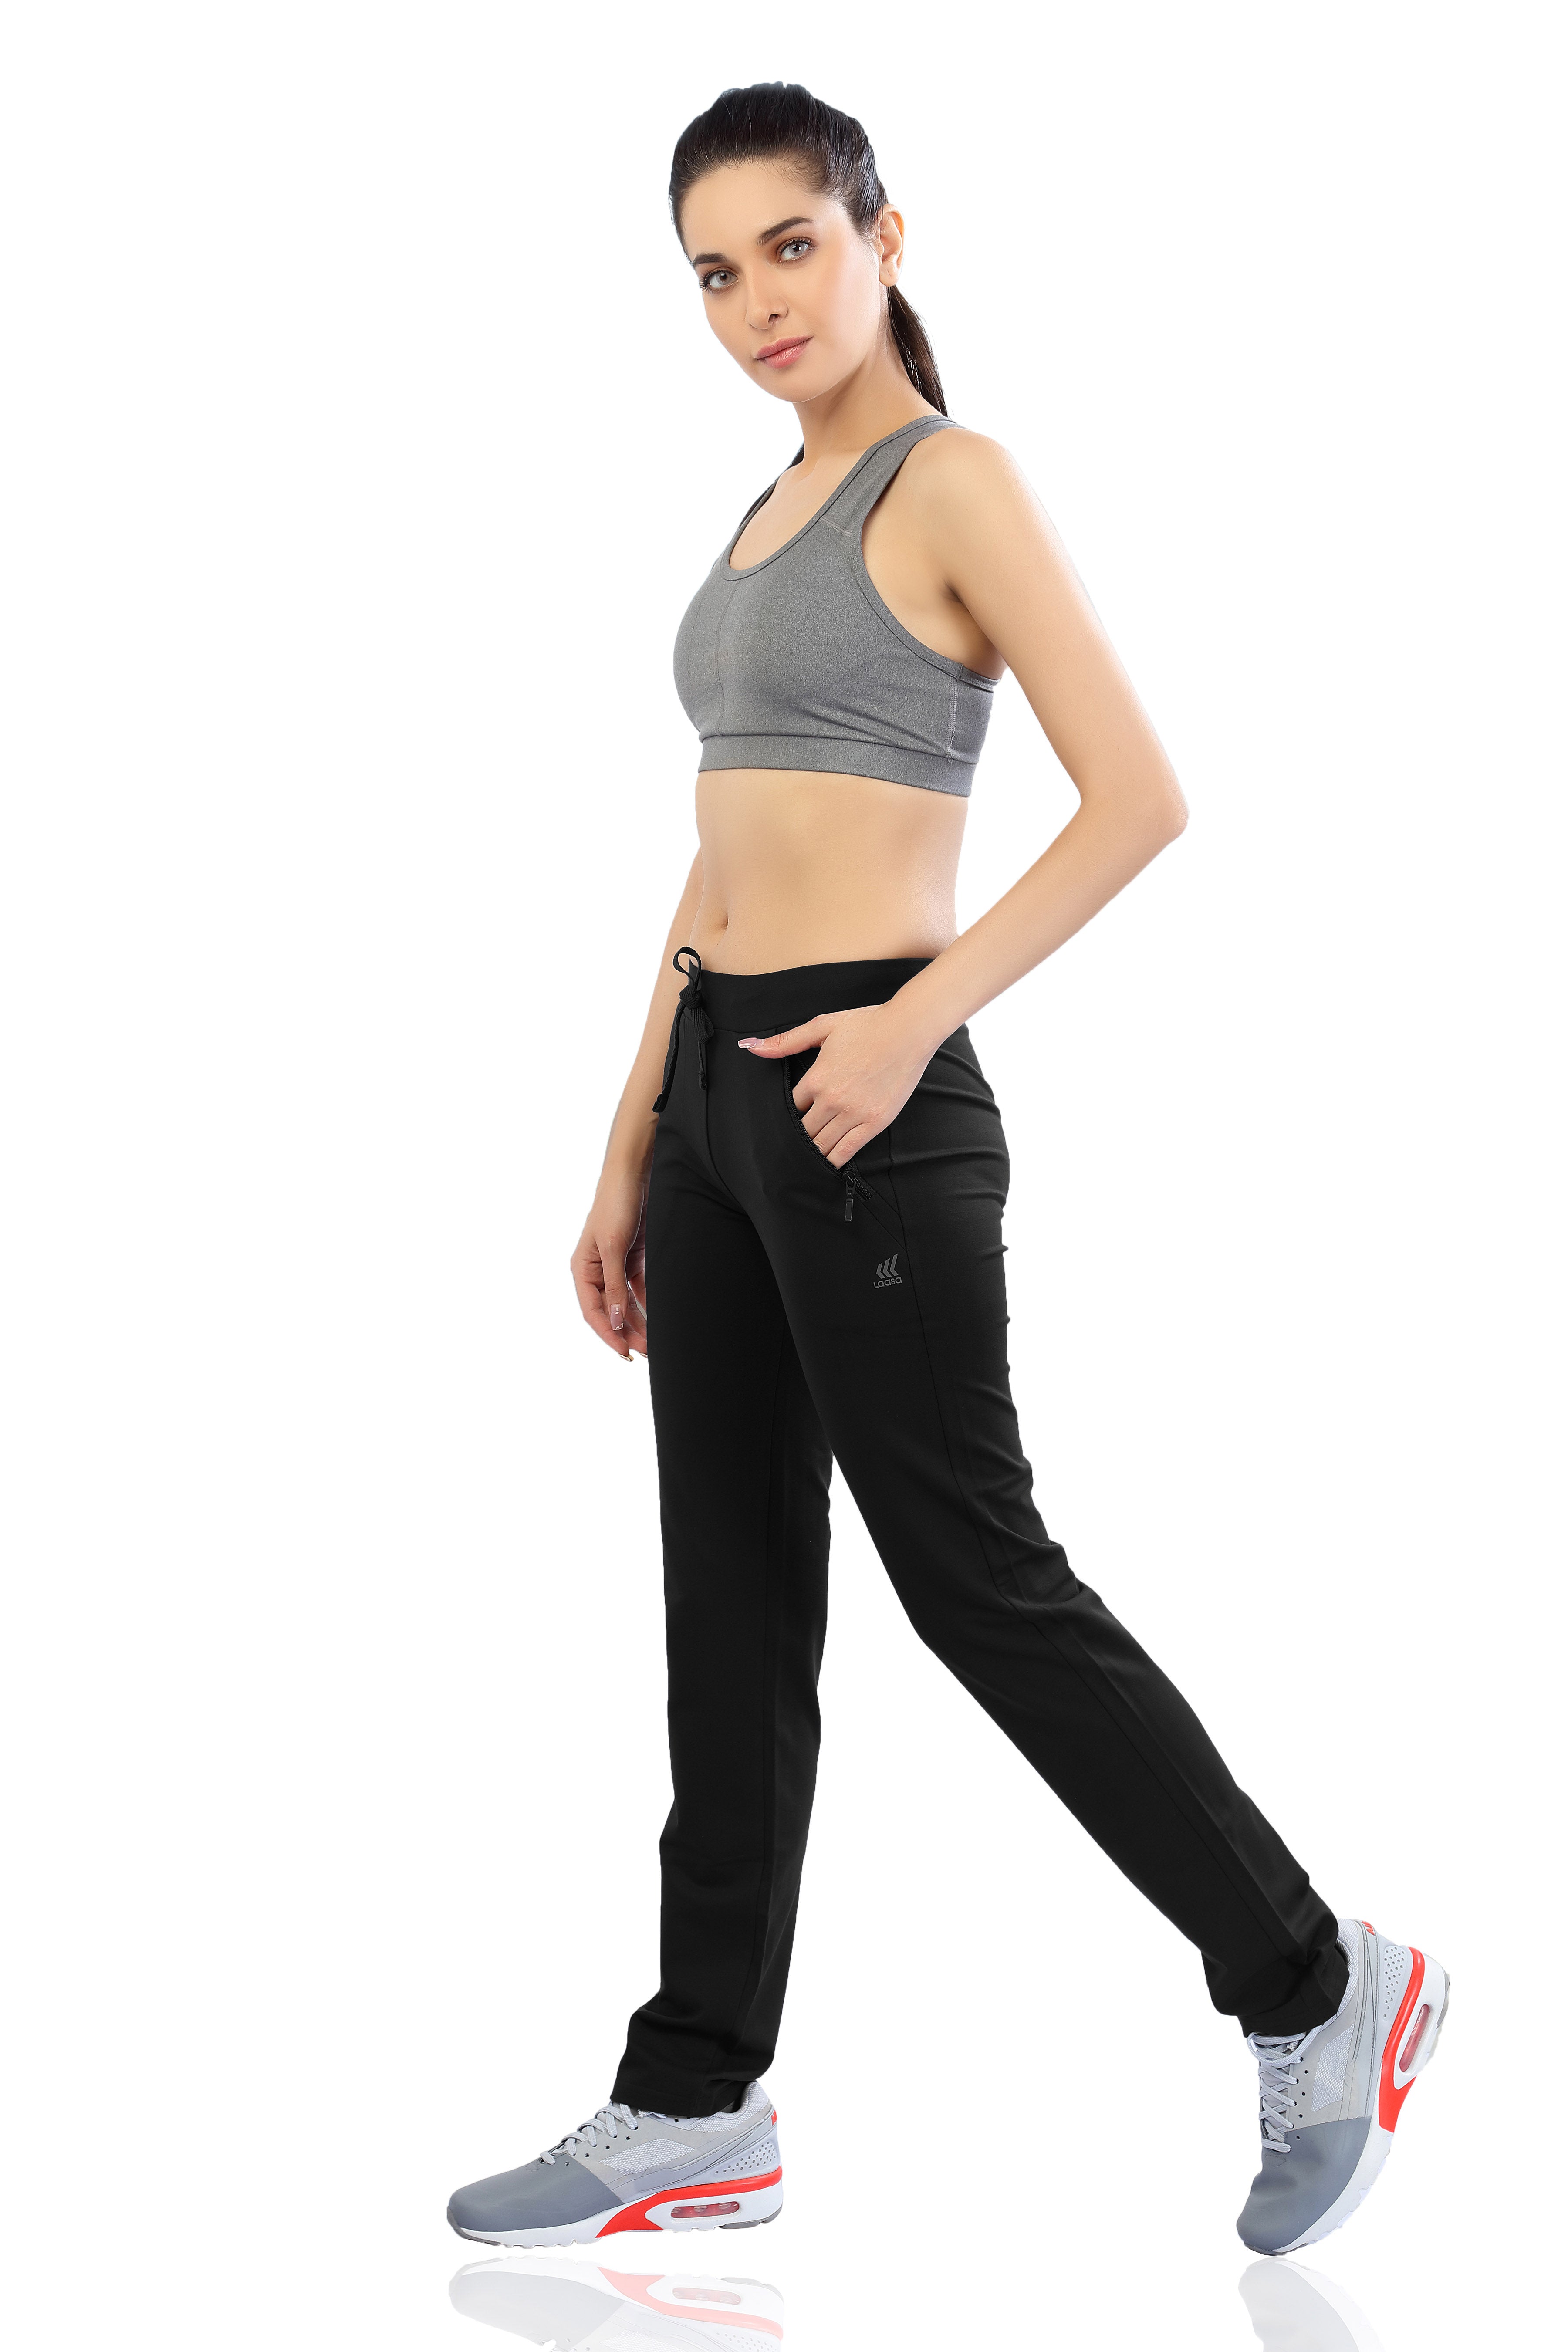 P&R Girl's Slim Fit Track Pants and Active Sports Fitness